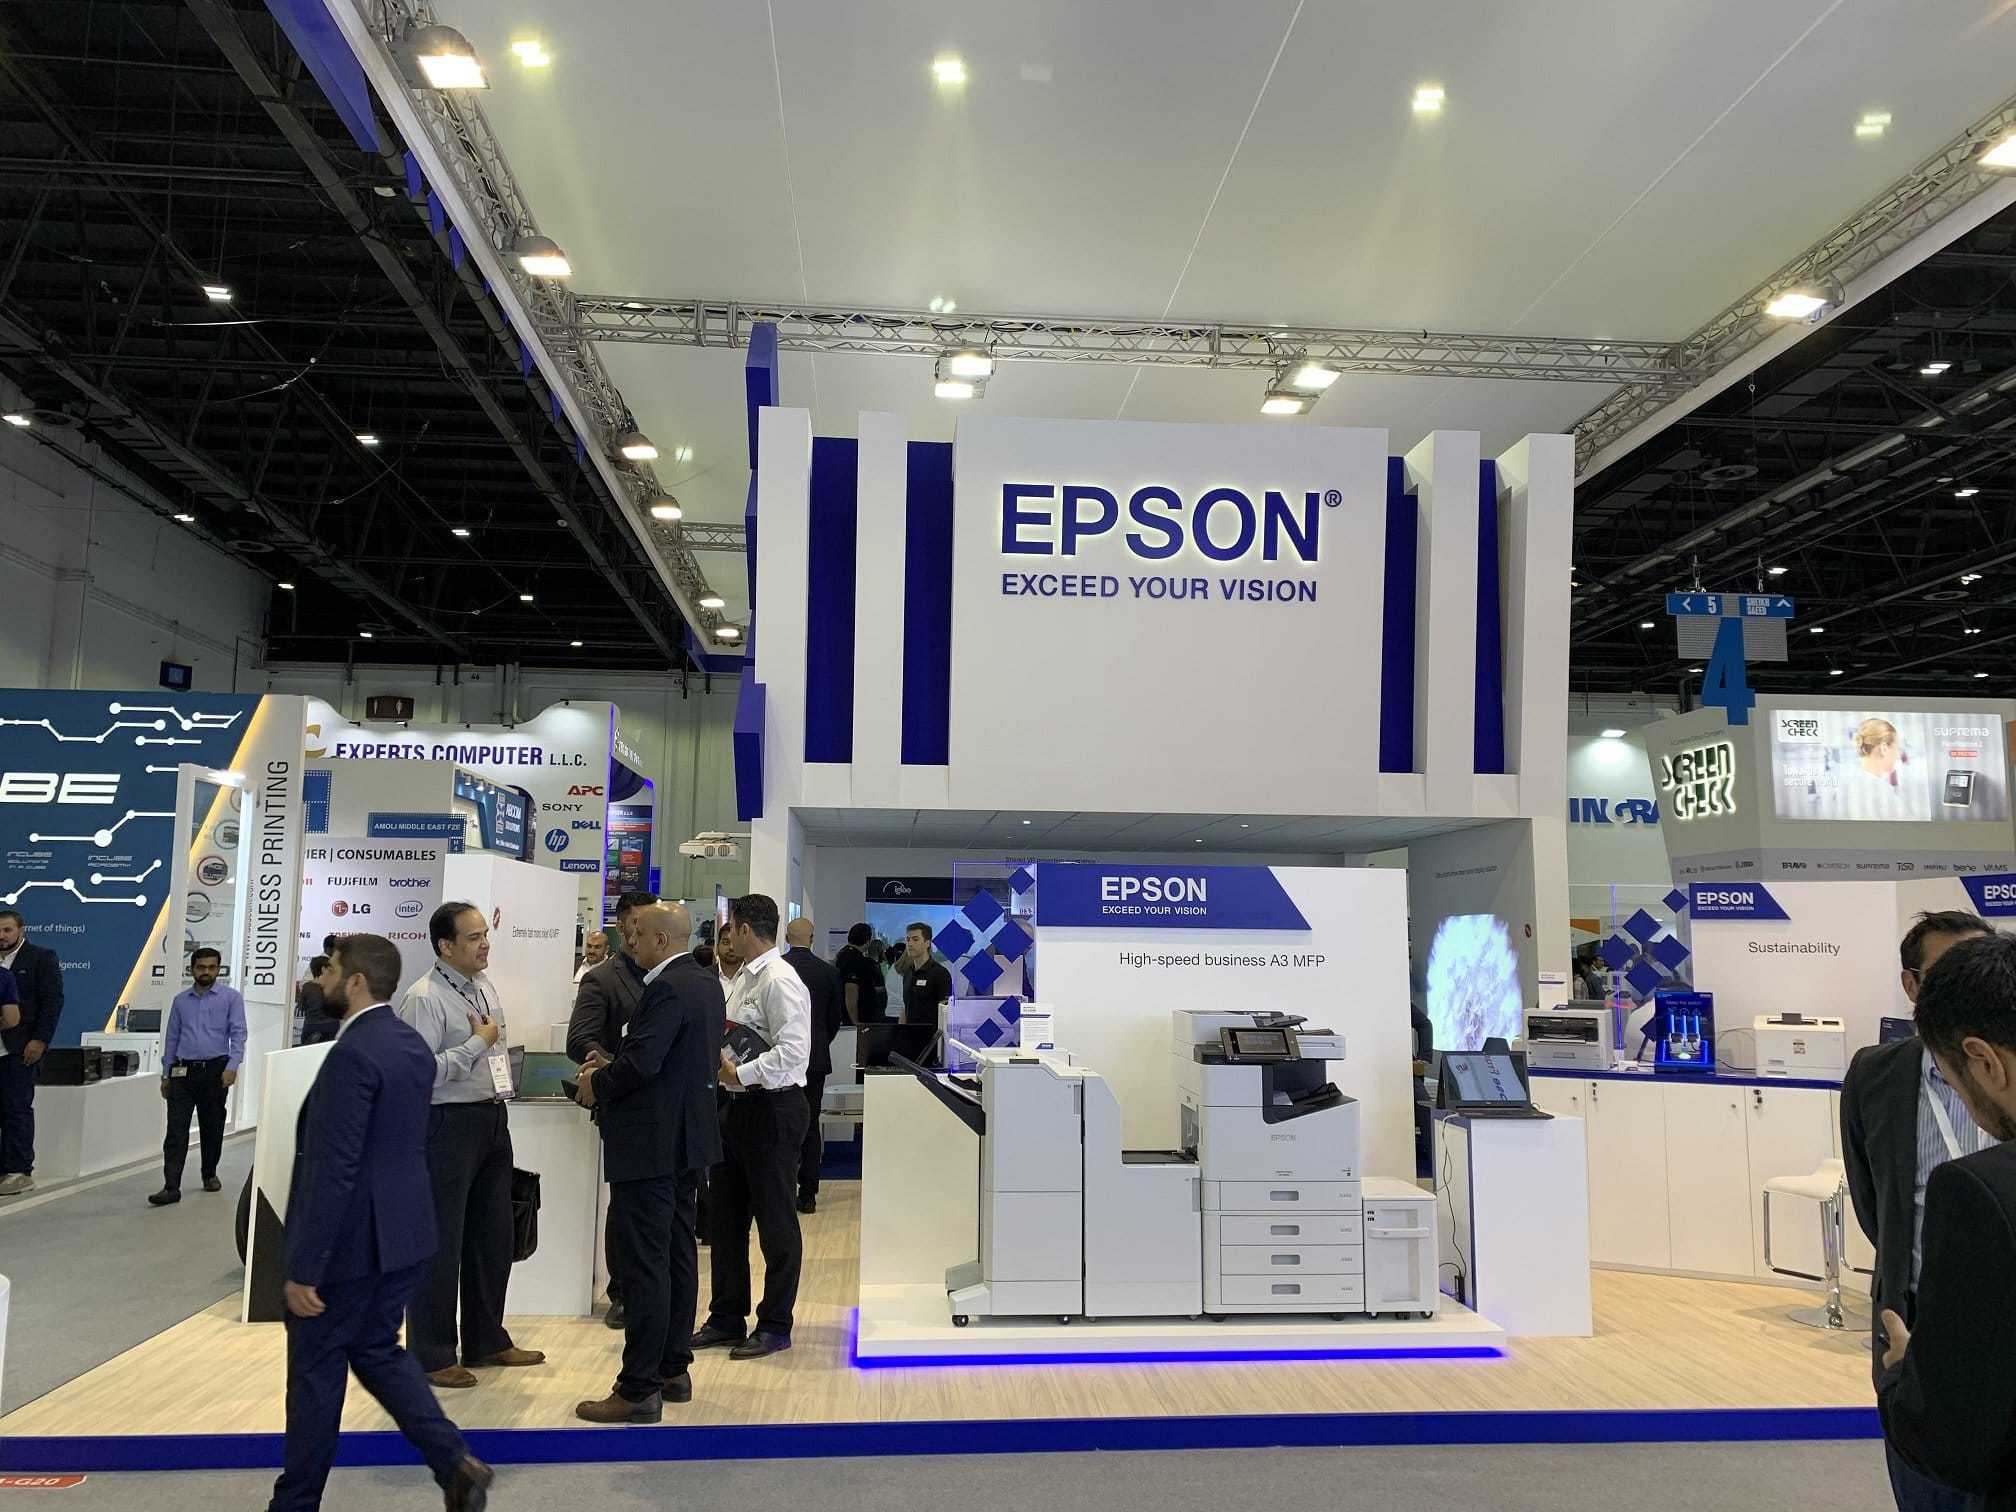 Shared VR experience at Epson GITEX stand attracts visitors